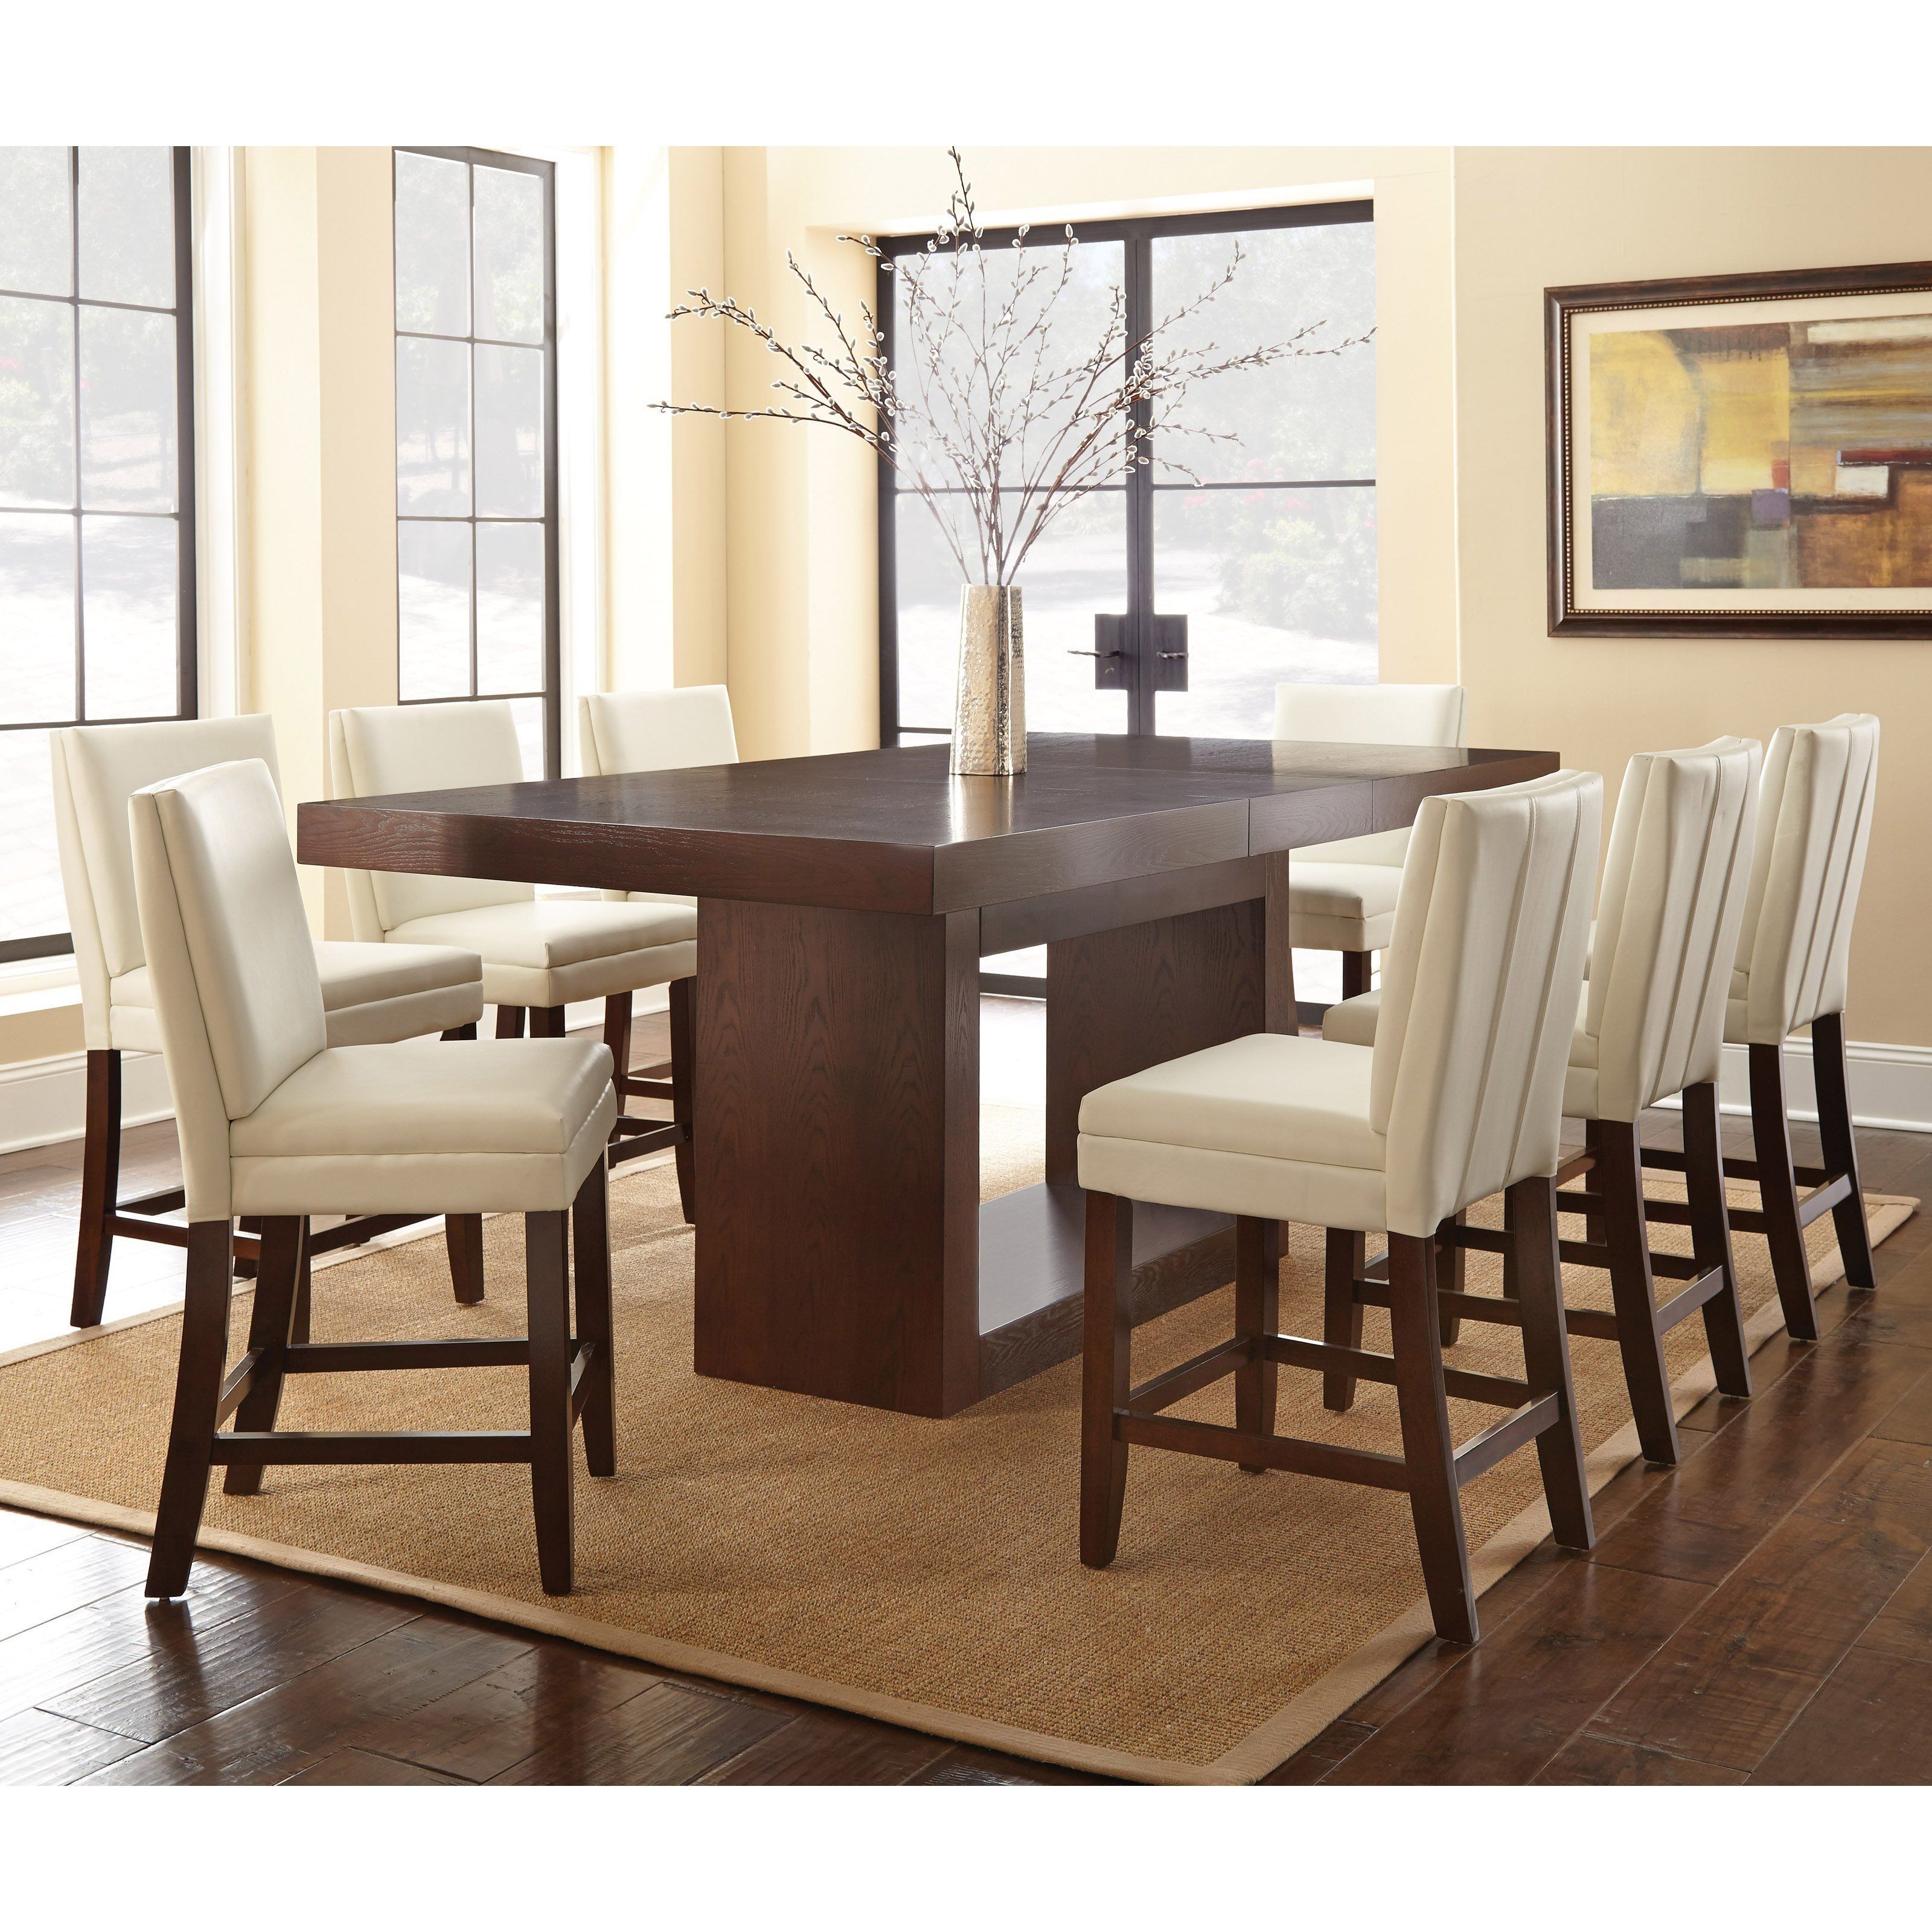 The 28 Best Of Dining Table Set San Diego – Welovedandelion Regarding Most Recent Craftsman 9 Piece Extension Dining Sets (View 10 of 20)